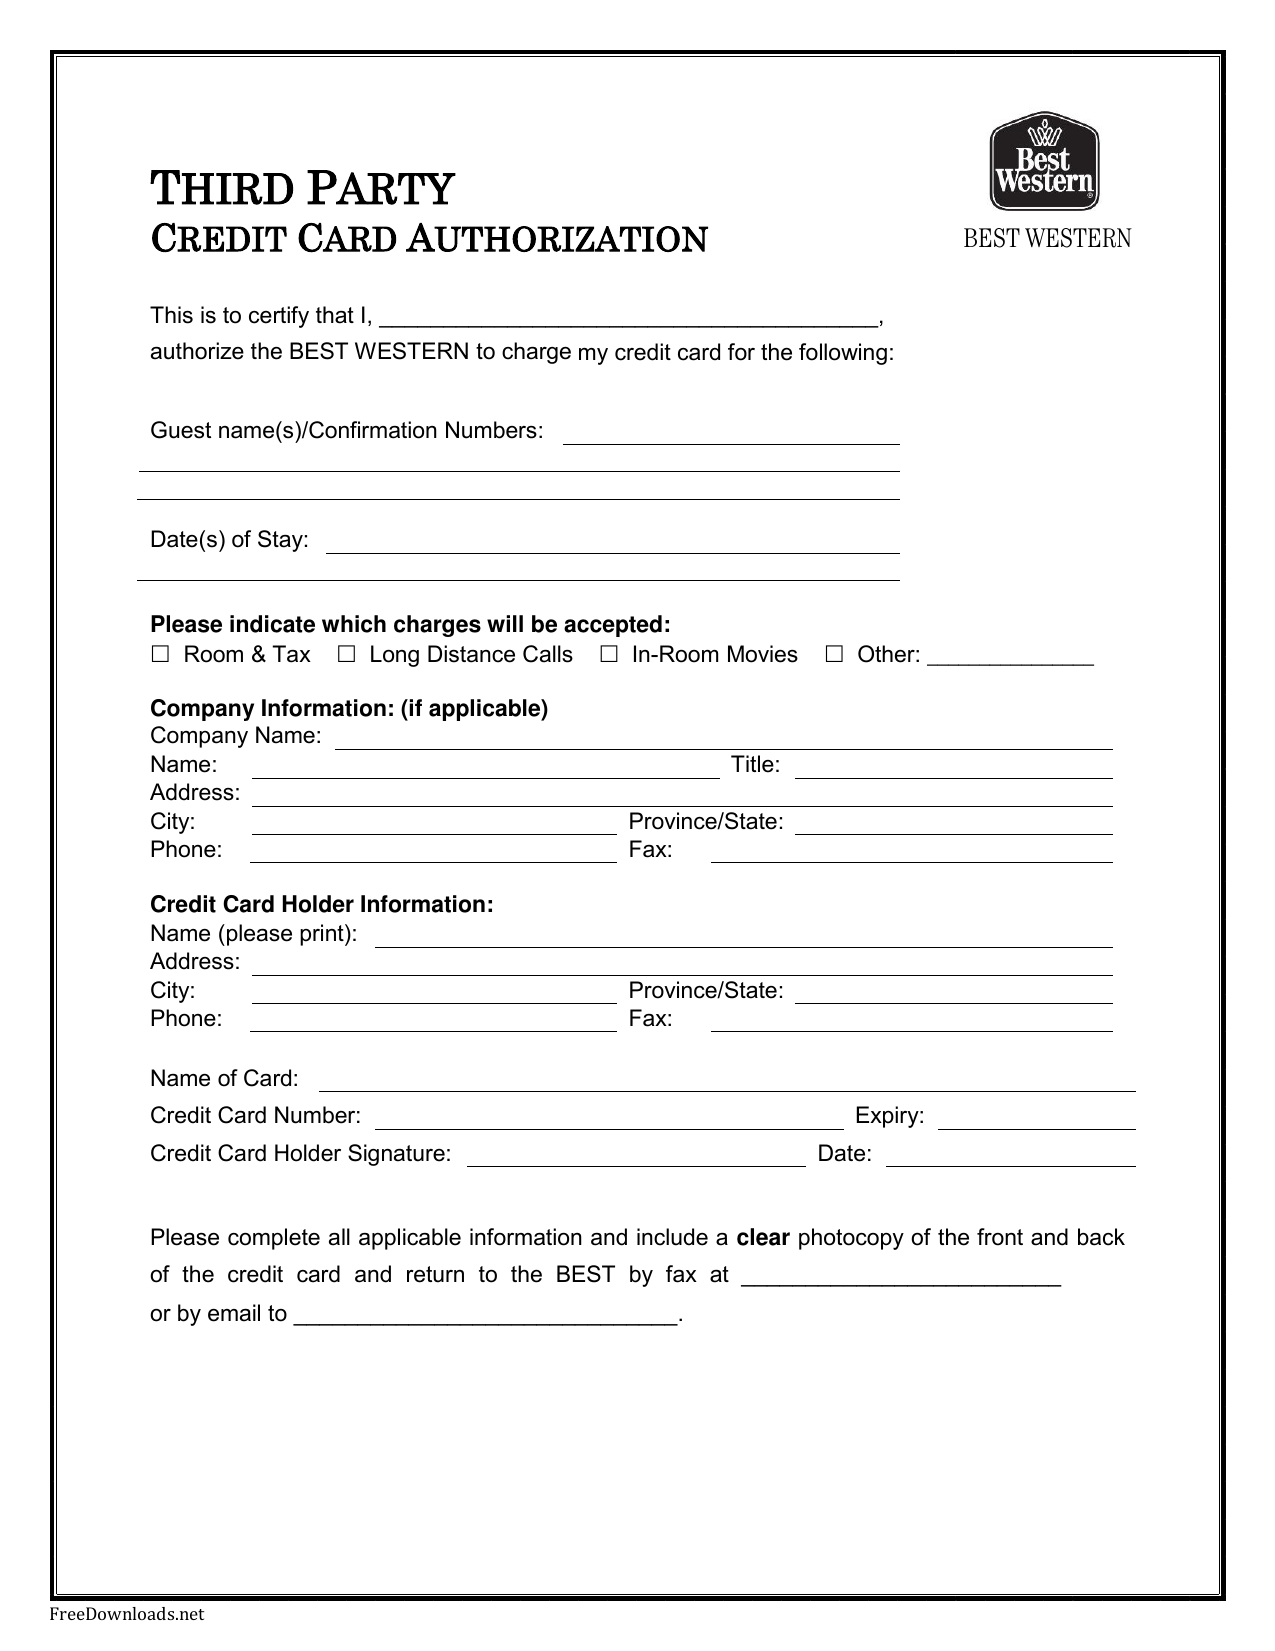 Download Best Western Credit Card Authorization Form With Credit Card Payment Form Template Pdf